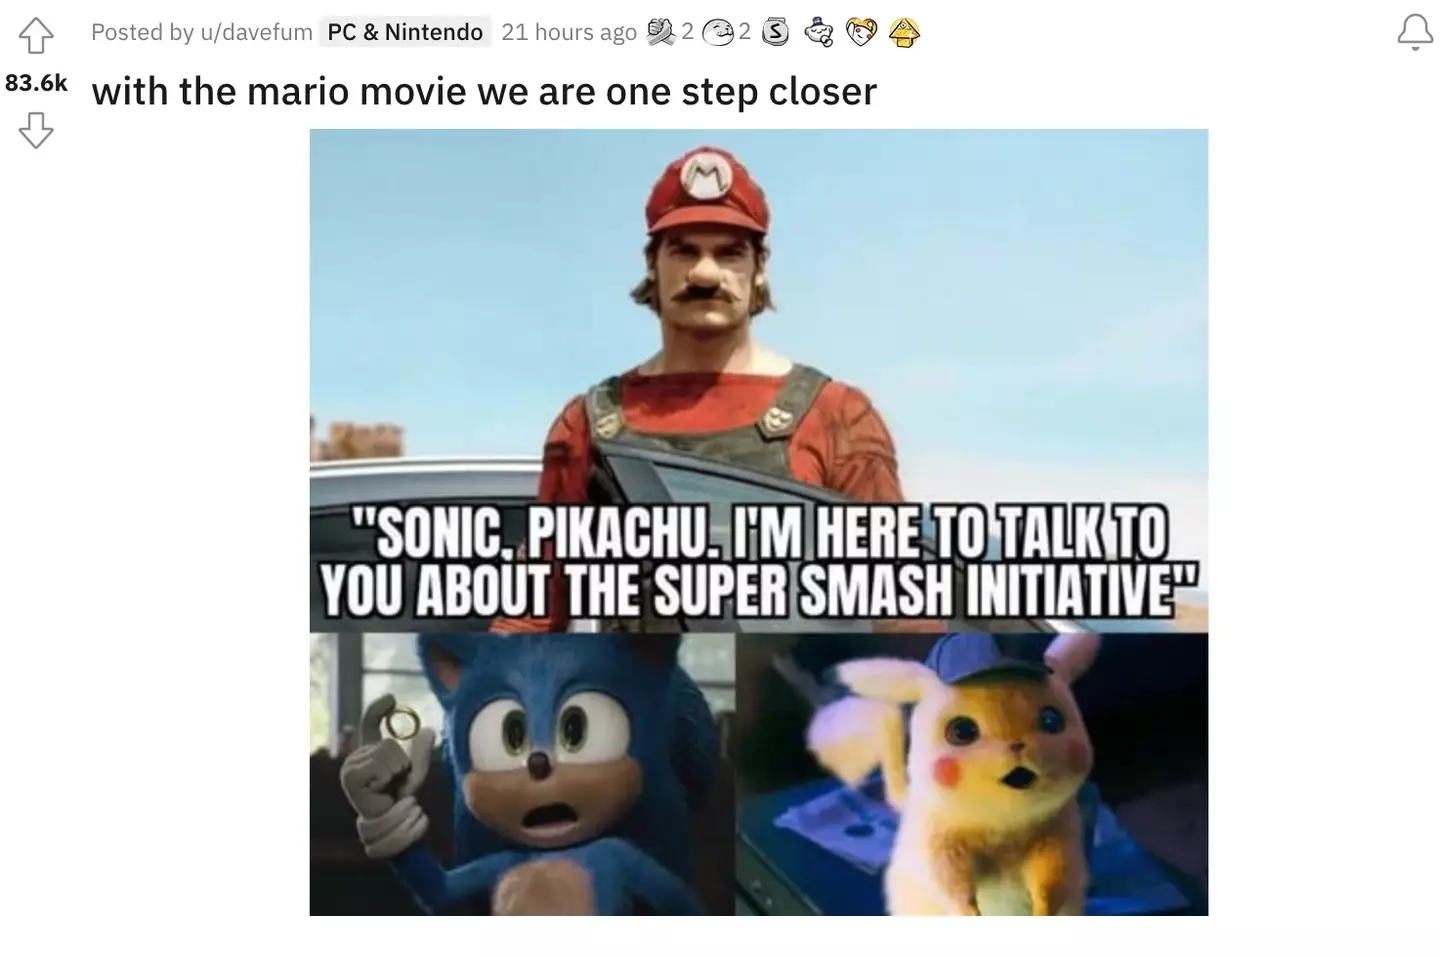 Fans are now calling for a Super Smash Bros. movie.